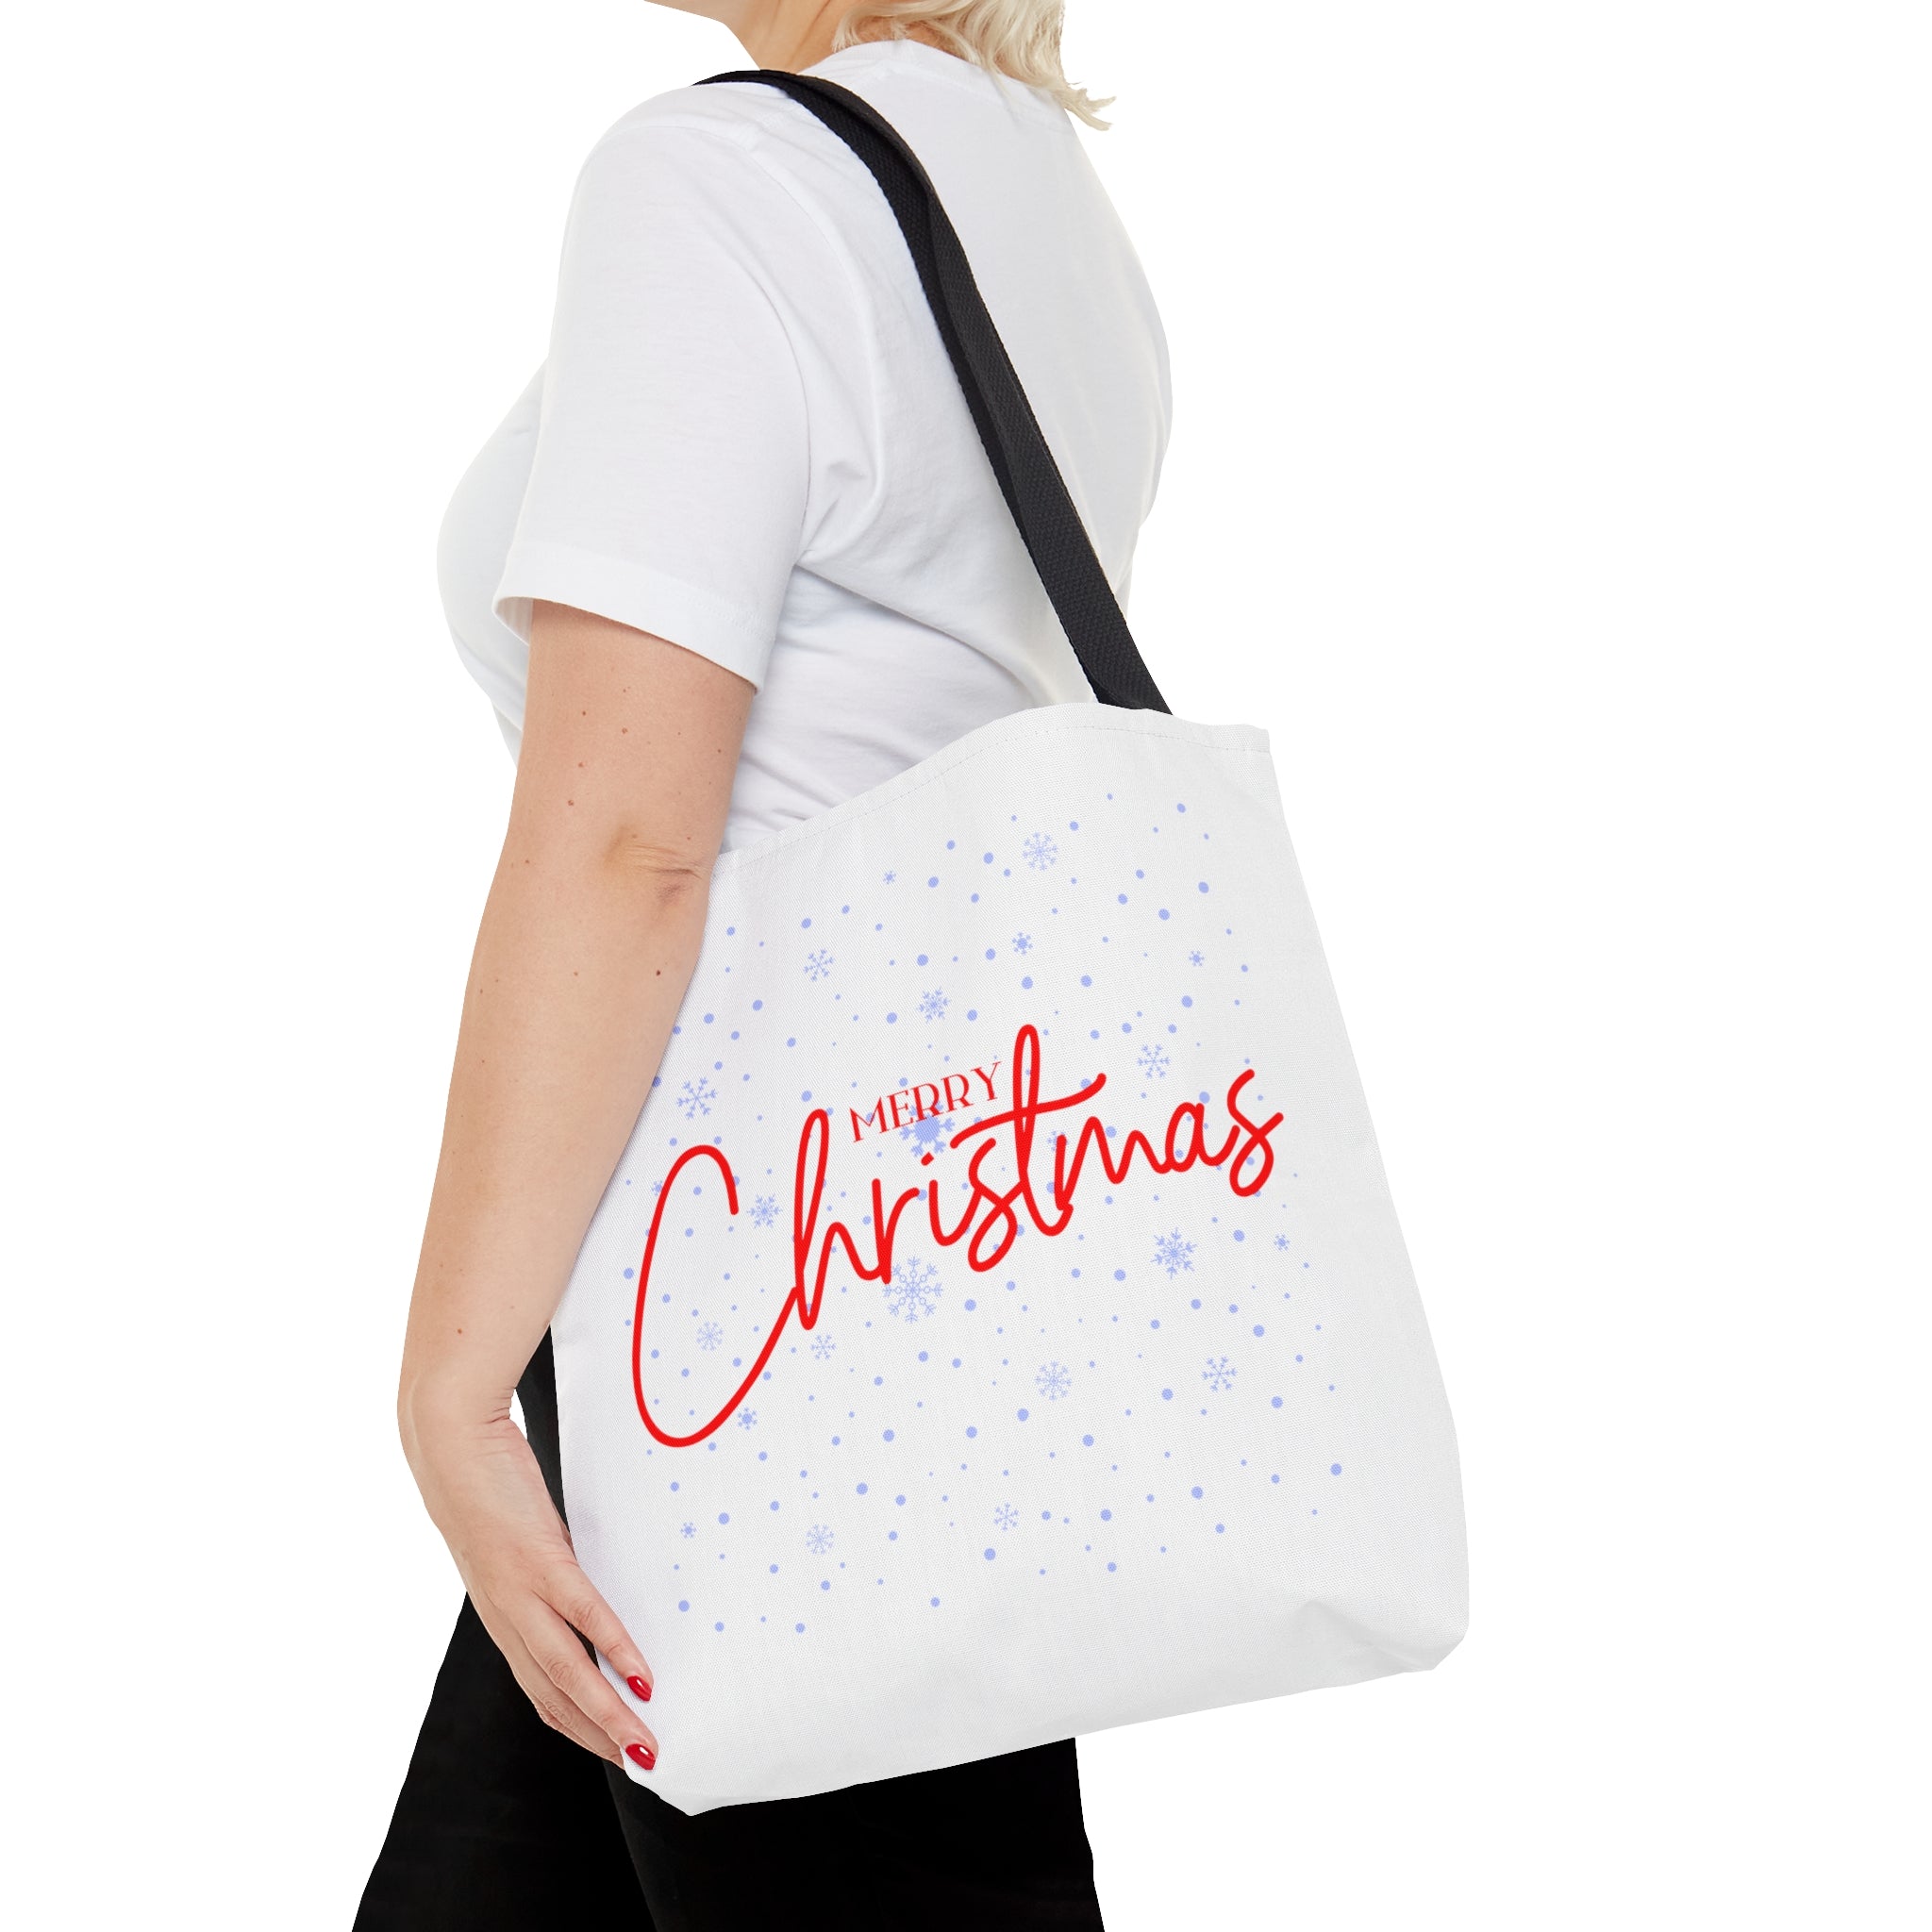 Merry Christmas Tote Bags, Reusable Canvas Tote Bags, Available in Different Size